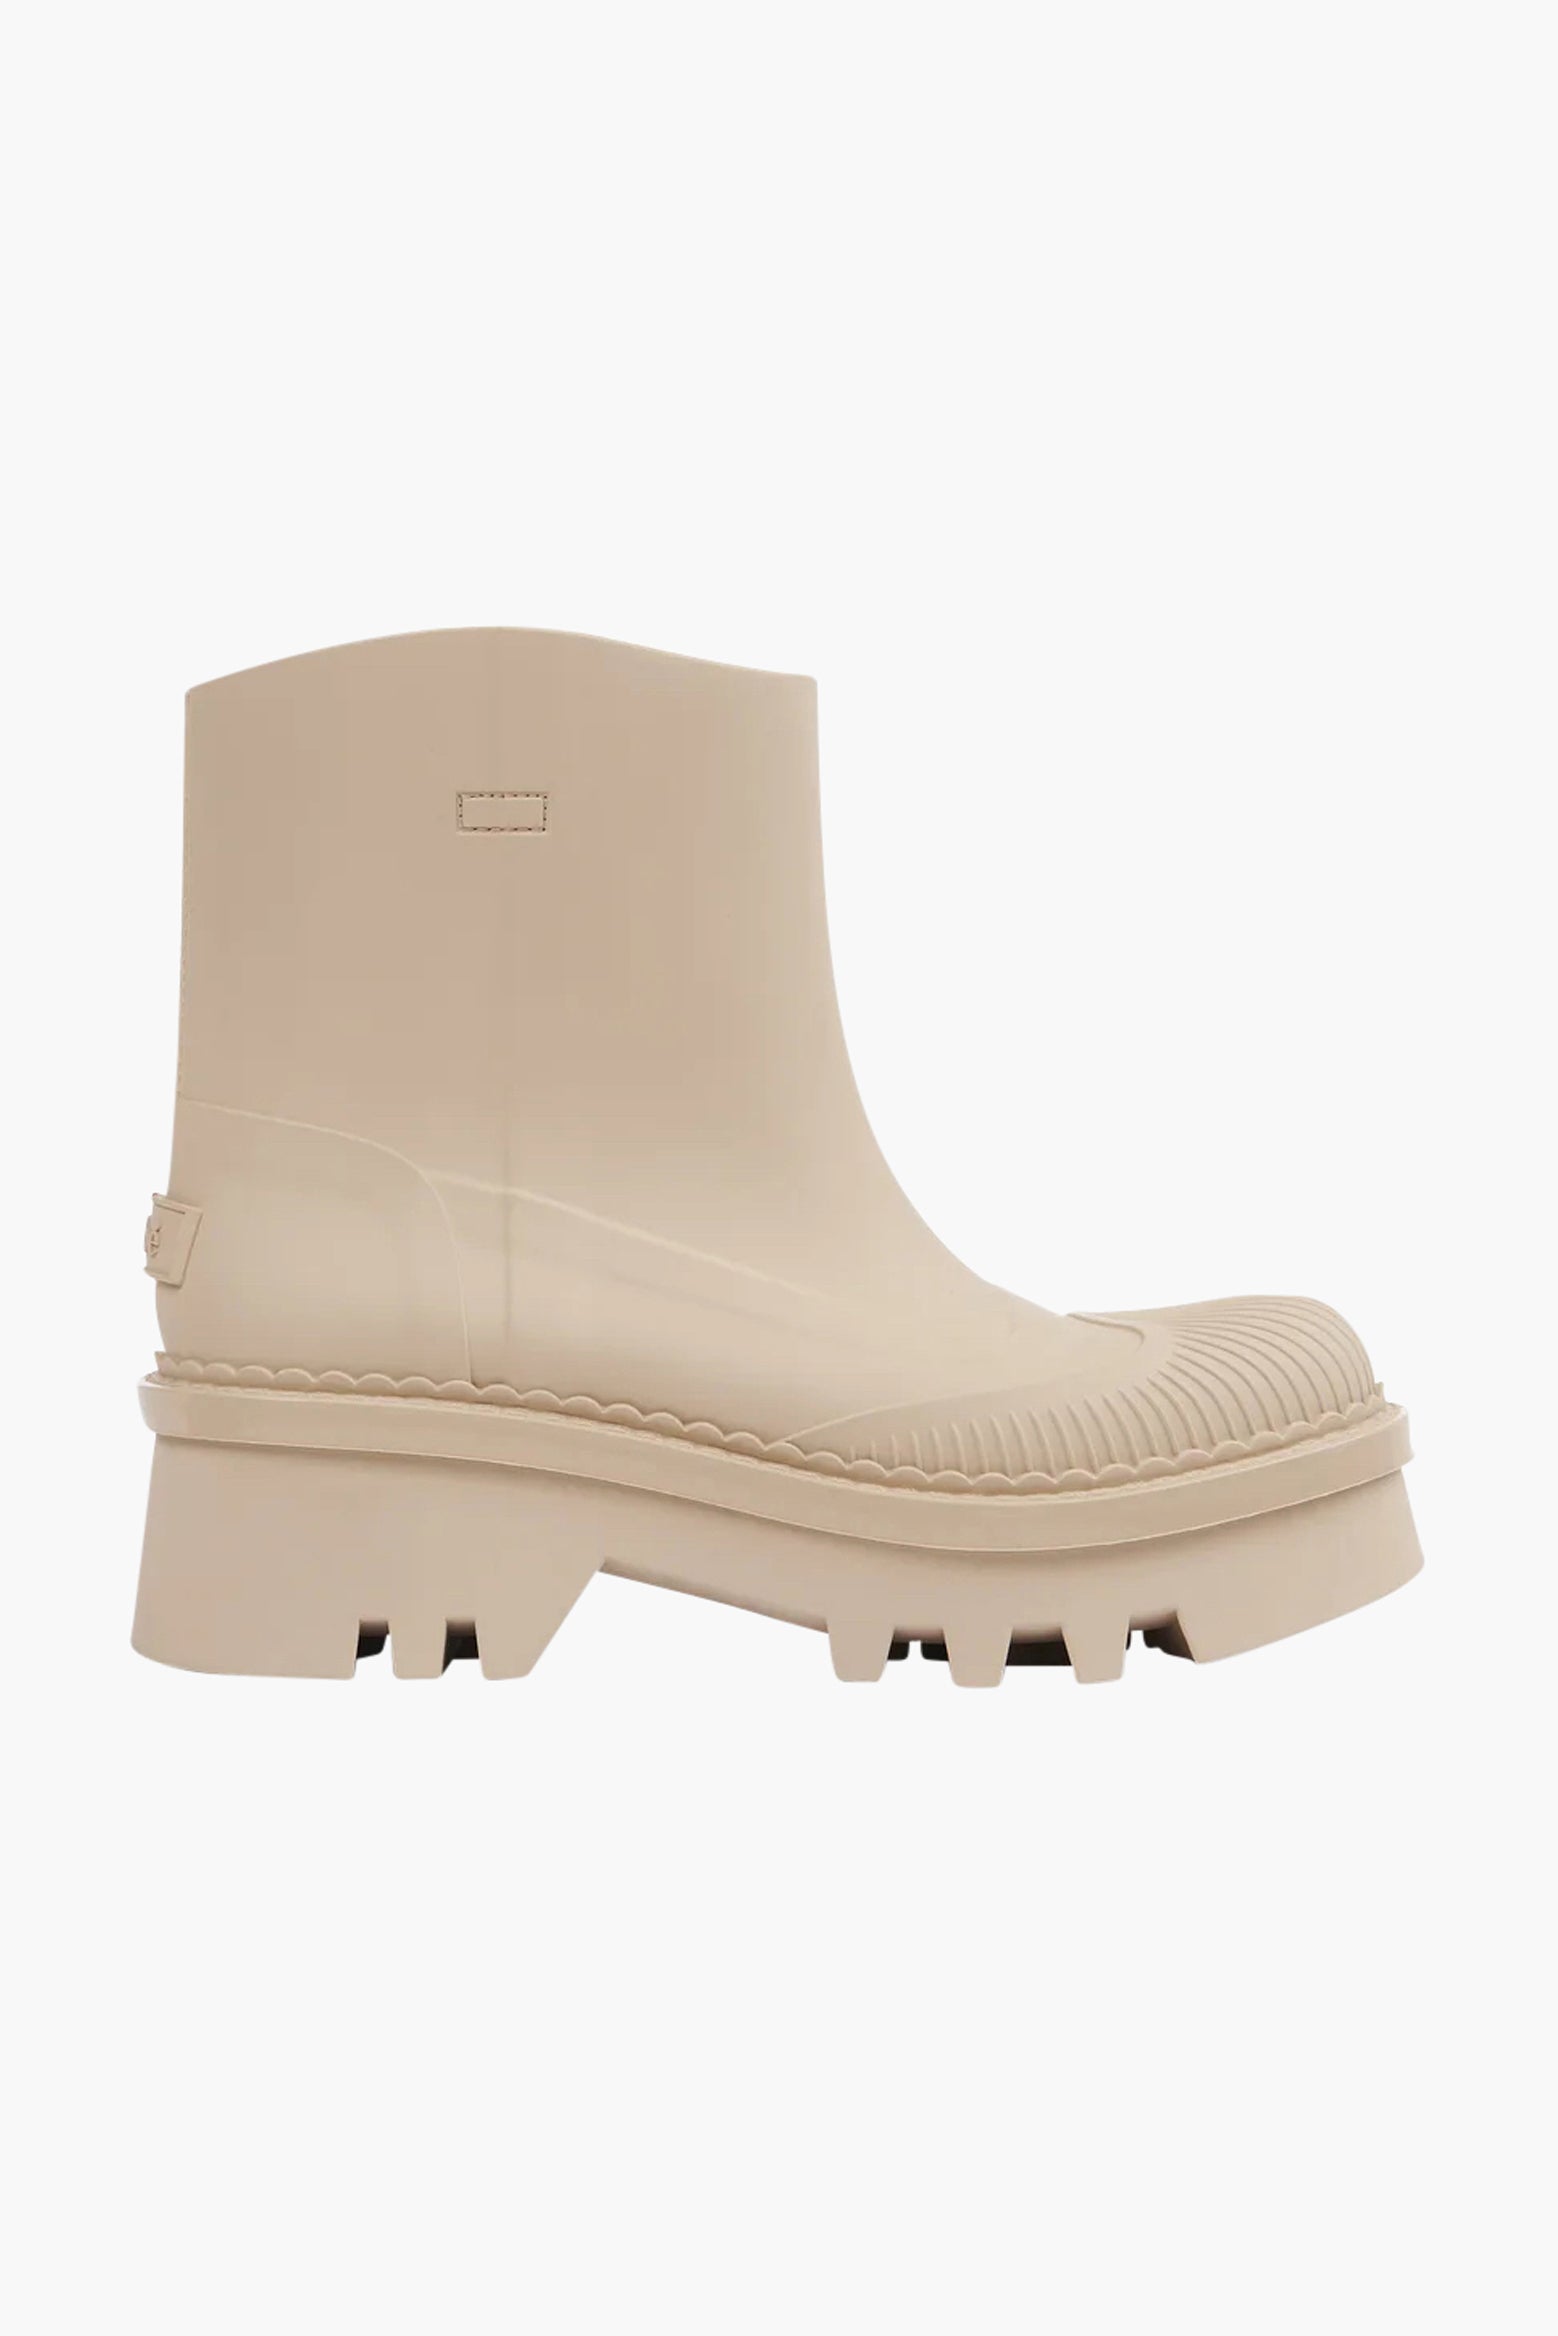 Chloe Raina Boot in Beige Rose available at The New Trend Australia.